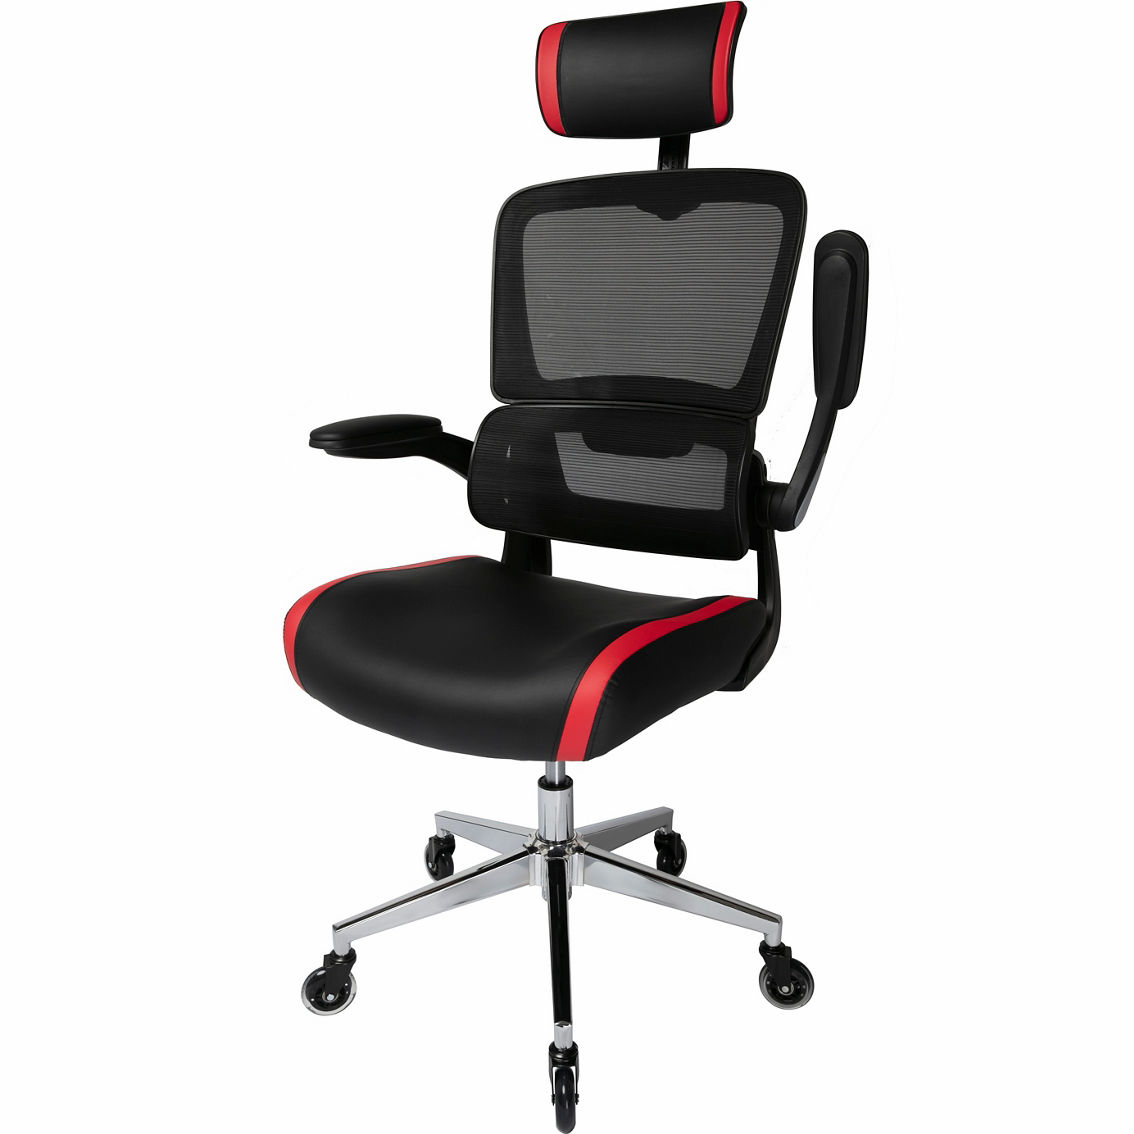 Simply Perfect Mesh Office Chair with Headrest - Image 5 of 10